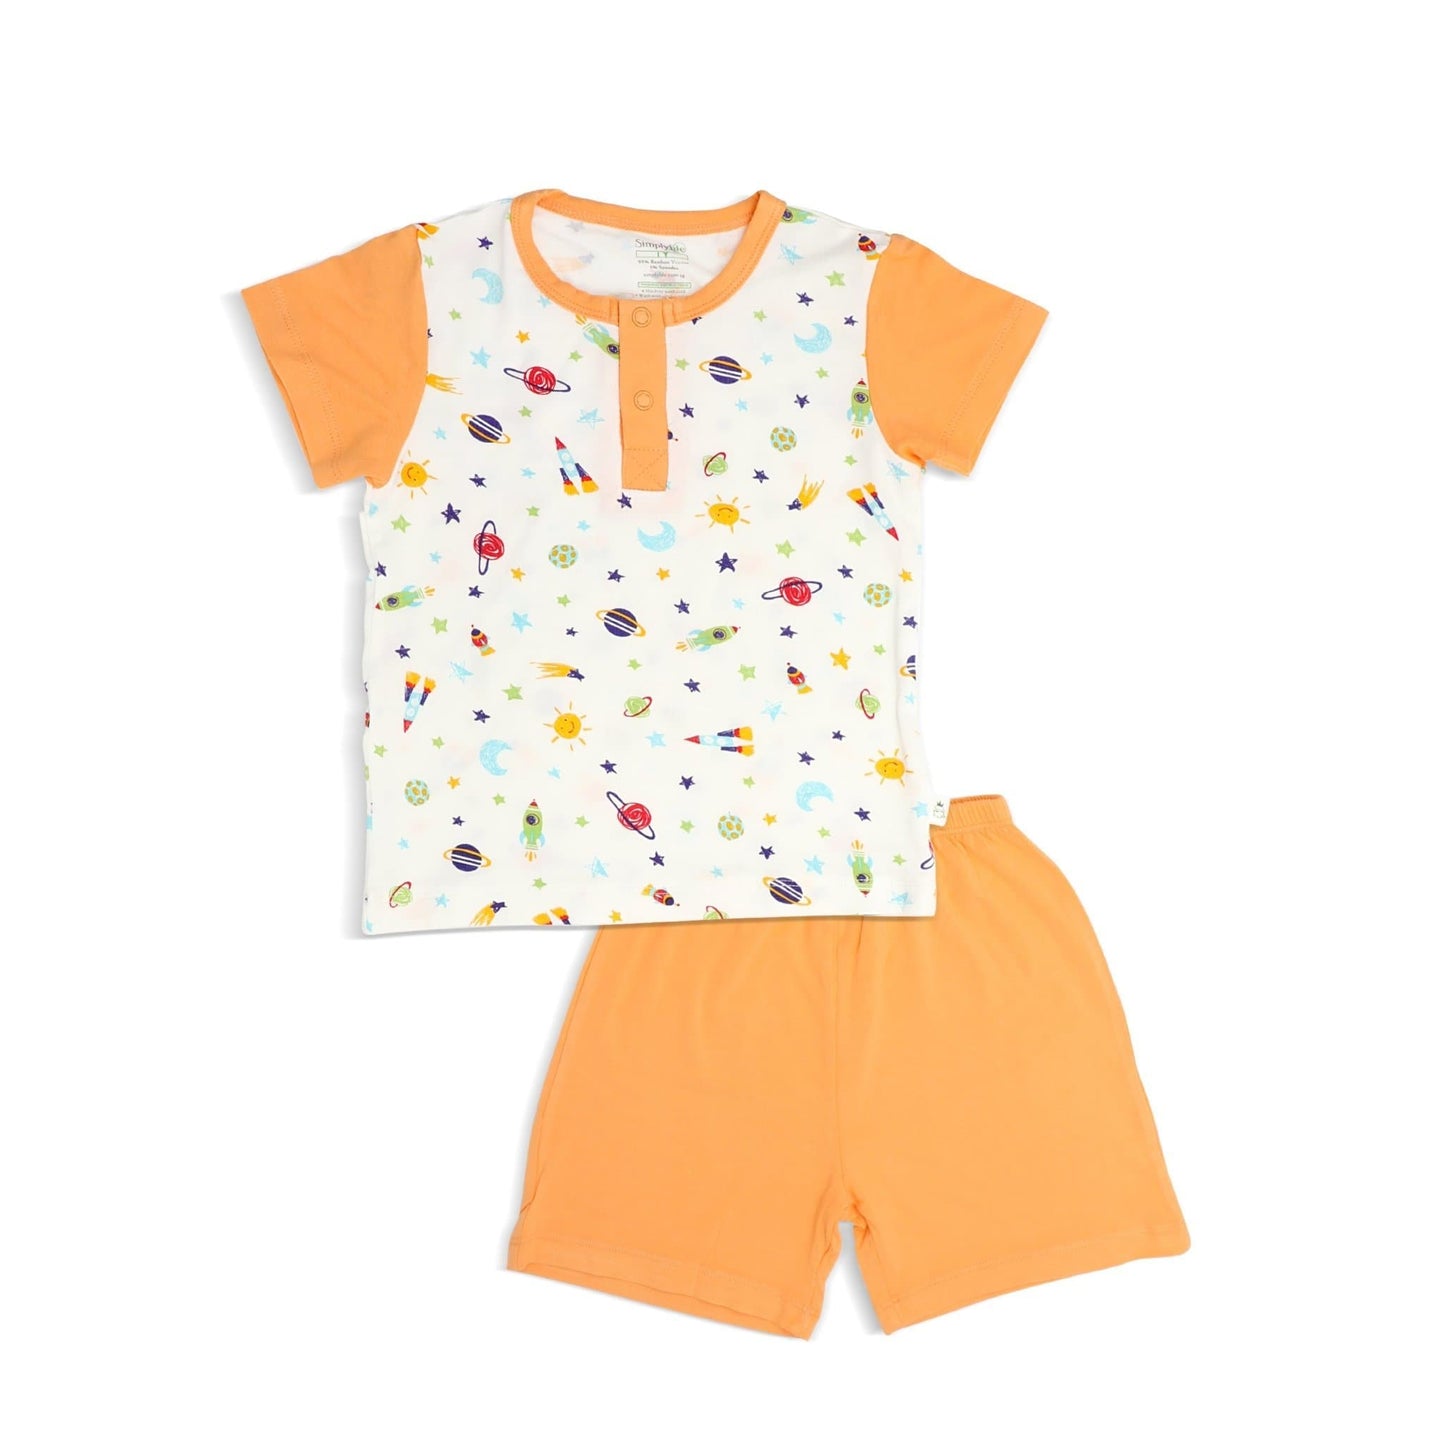 Spaceships - Shorts & Tee Set with Snap Buttons by simplylifebaby